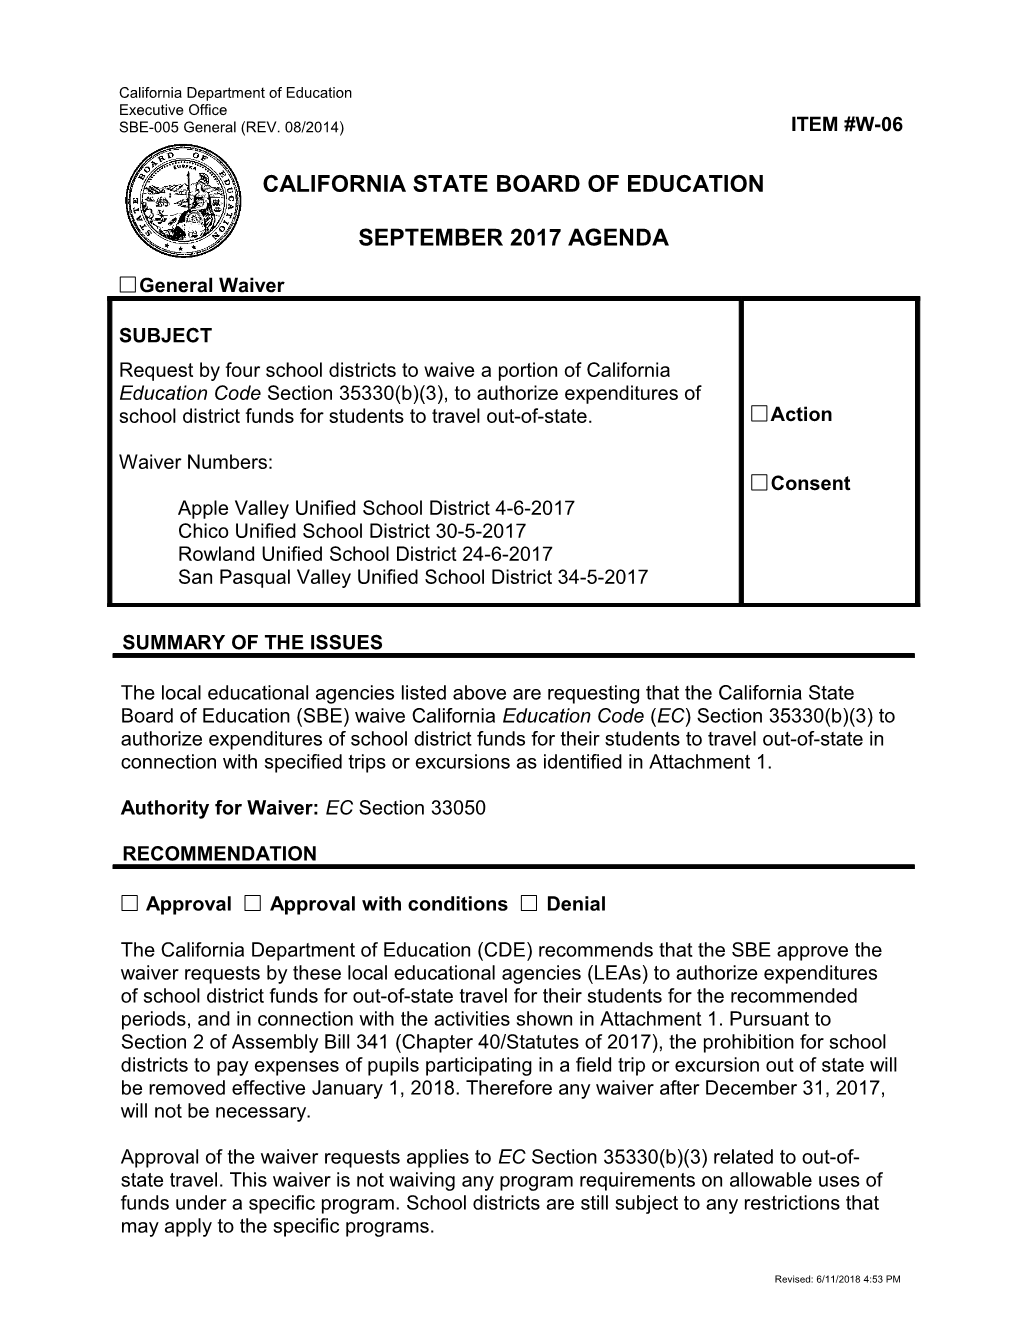 September 2017 Waiver Item W-06 - Meeting Agendas (CA State Board of Education)